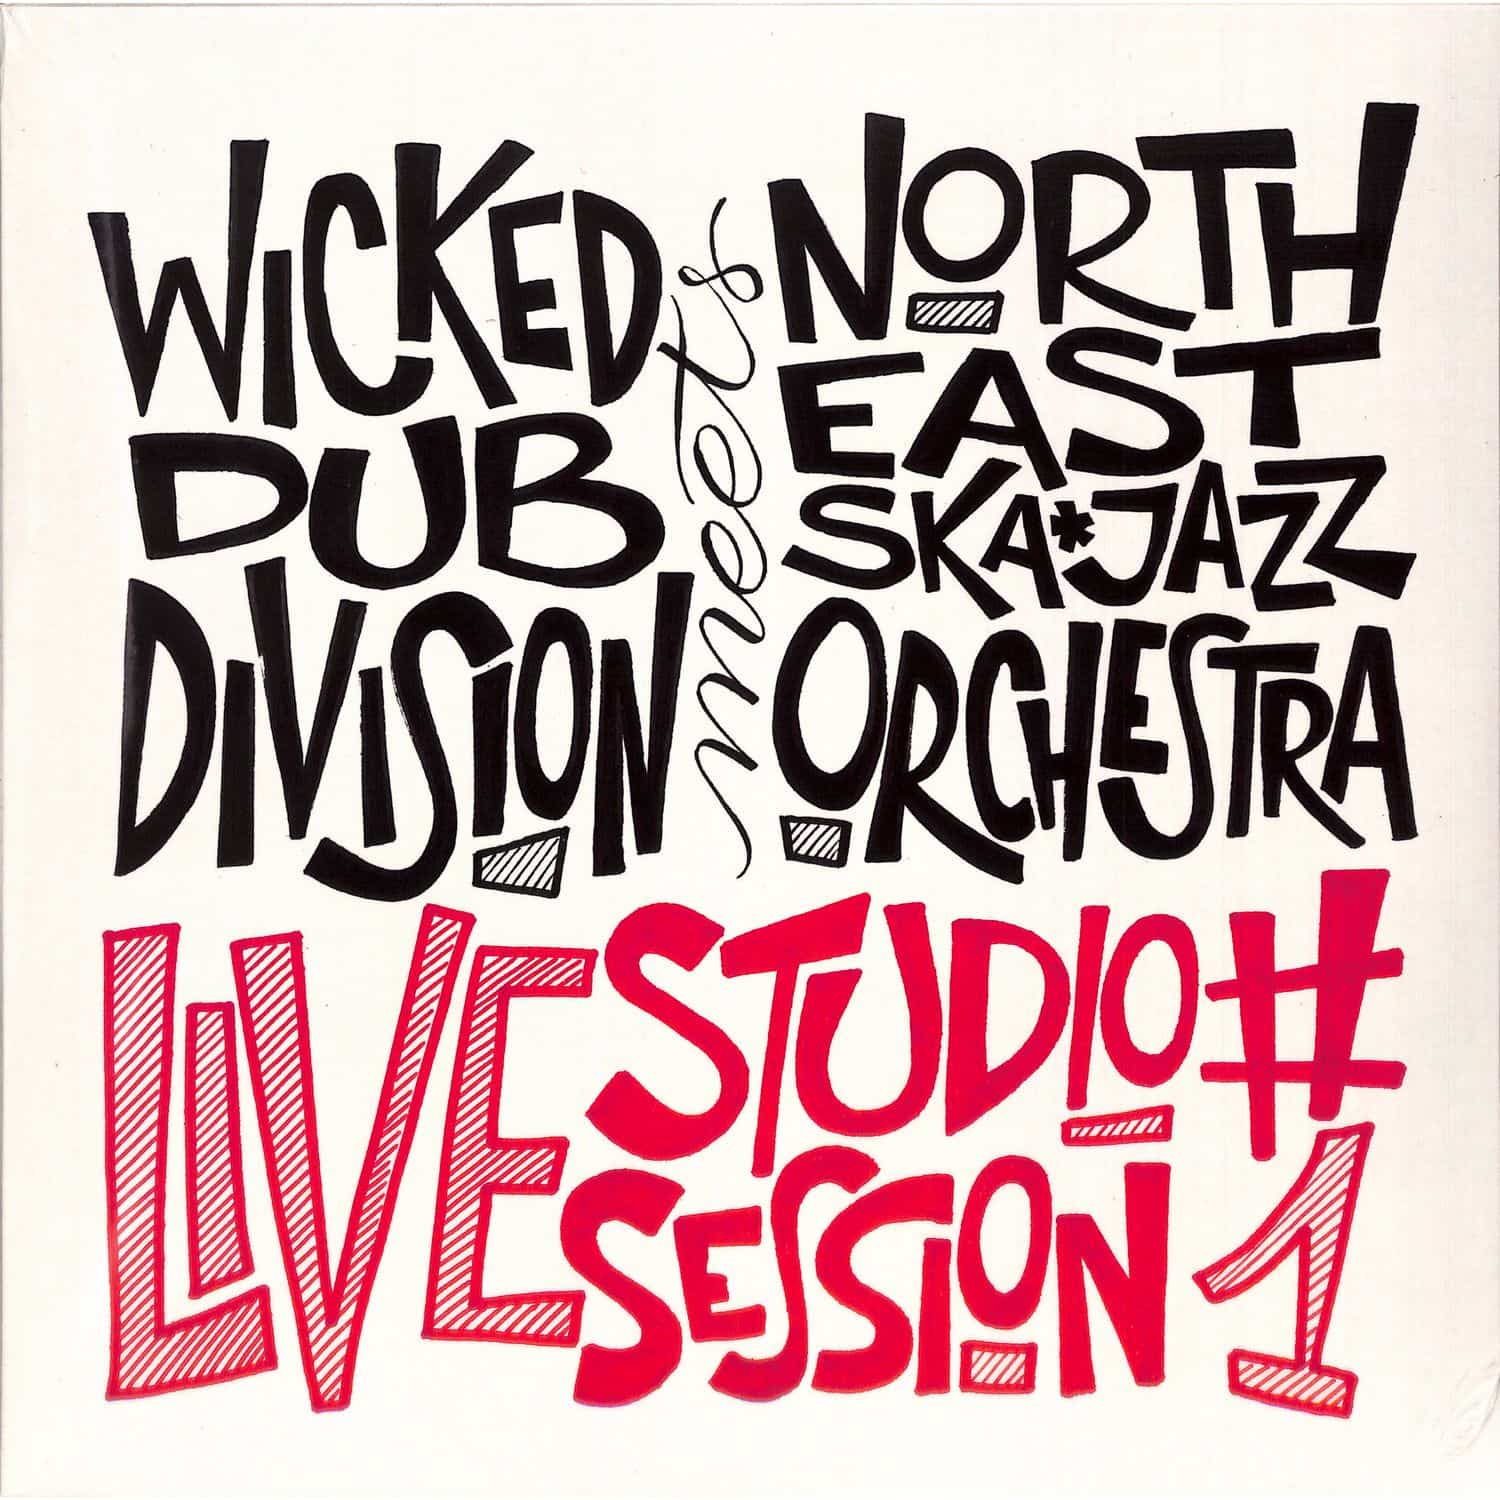 Wicked Dub Division meets North East Ska Jazz Orchestra - LIVE STUDIO SESSION #1 